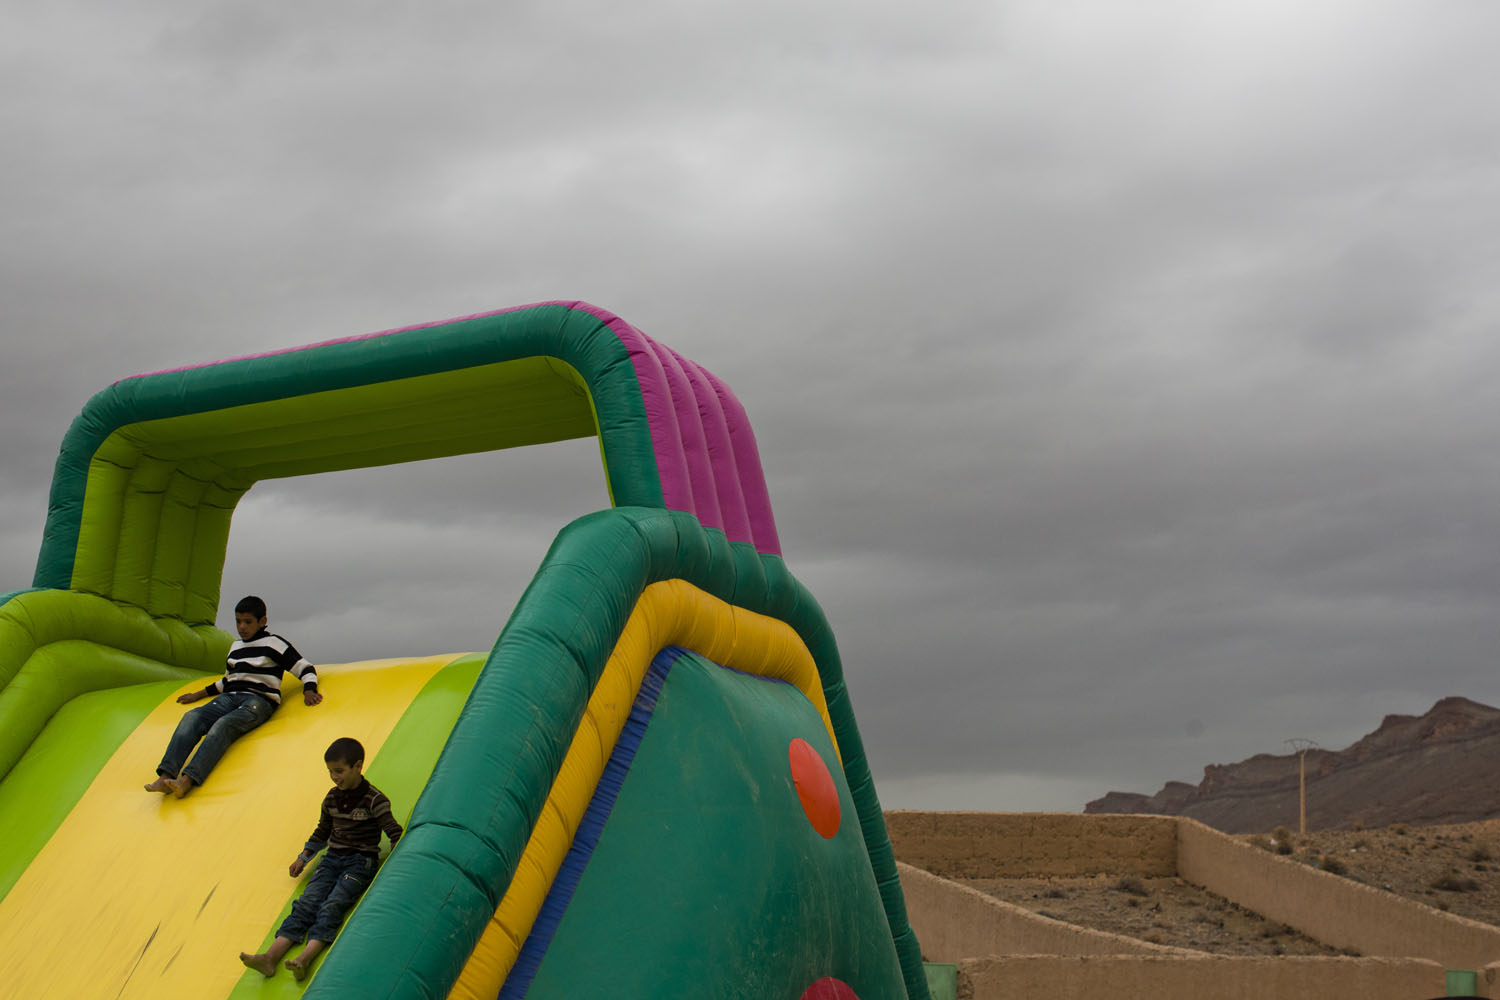 Morocco, 2011. 
                              Children play on a bouncy castle during a festival as a storm rolls in near the northern edge of the Sahara desert in present day Morocco.